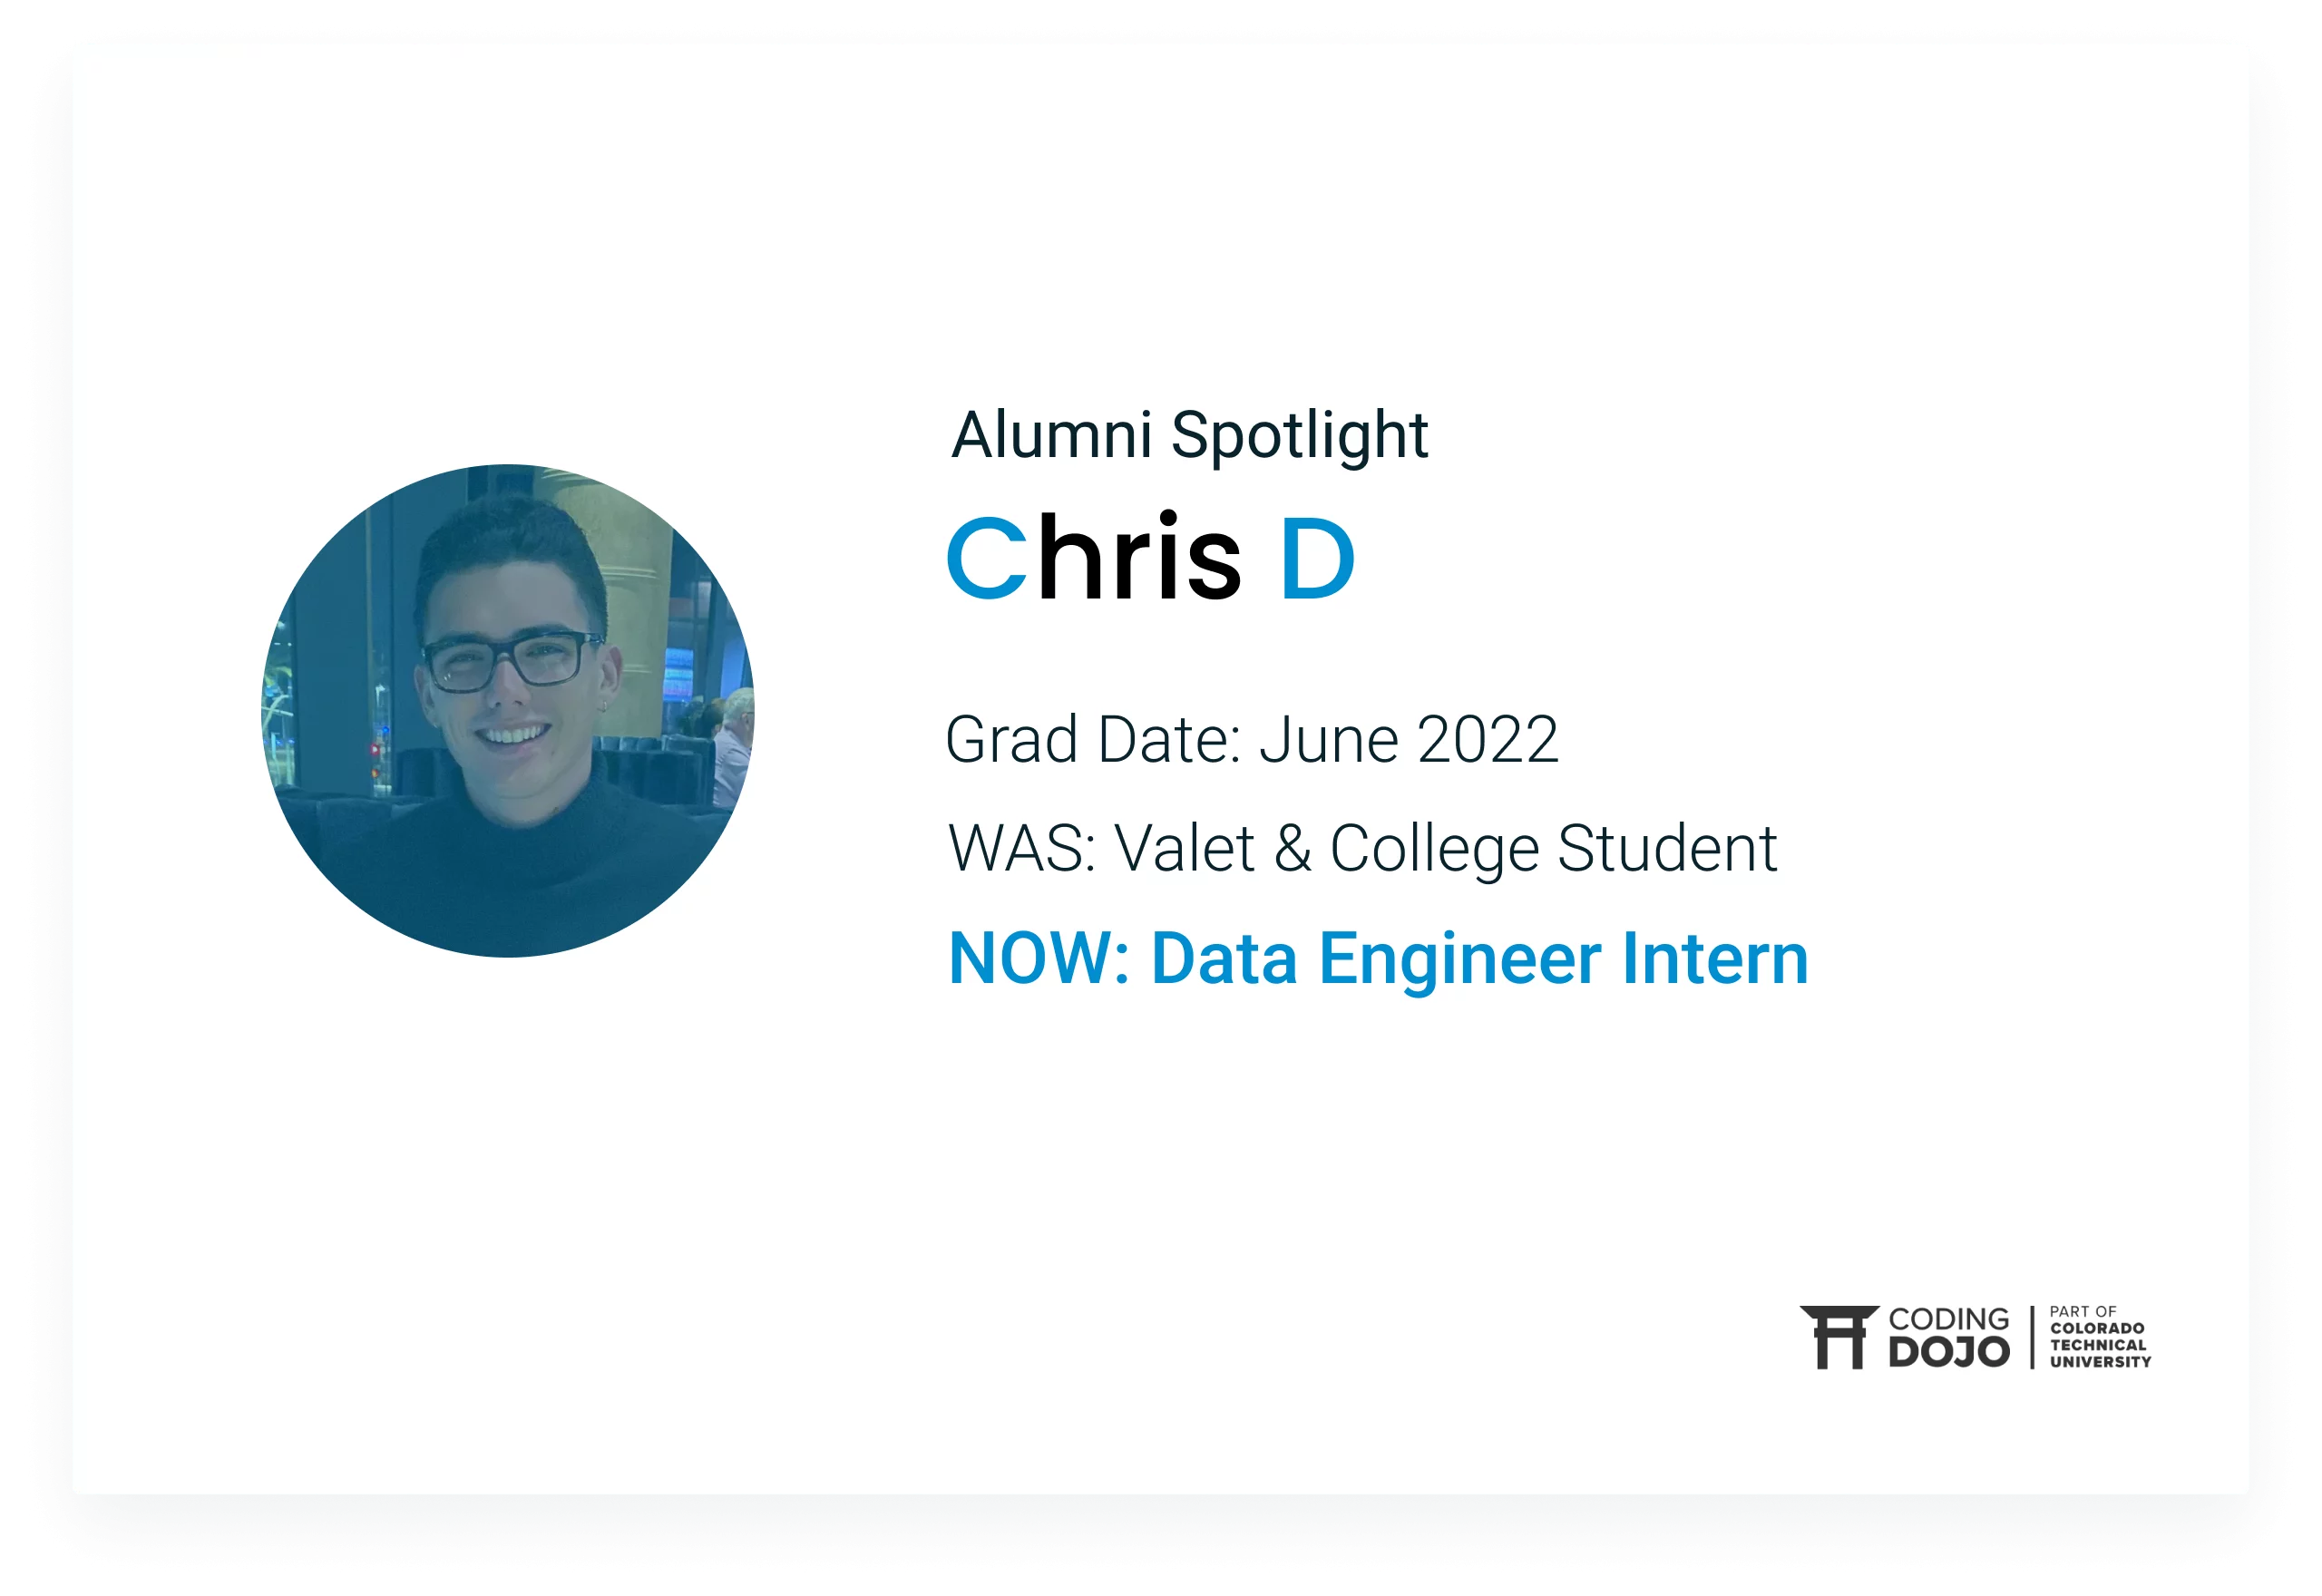 From Valet to Data Engineer Intern | How Chris D Pivoted and Took the Leap to Accelerate His Career Path in Tech